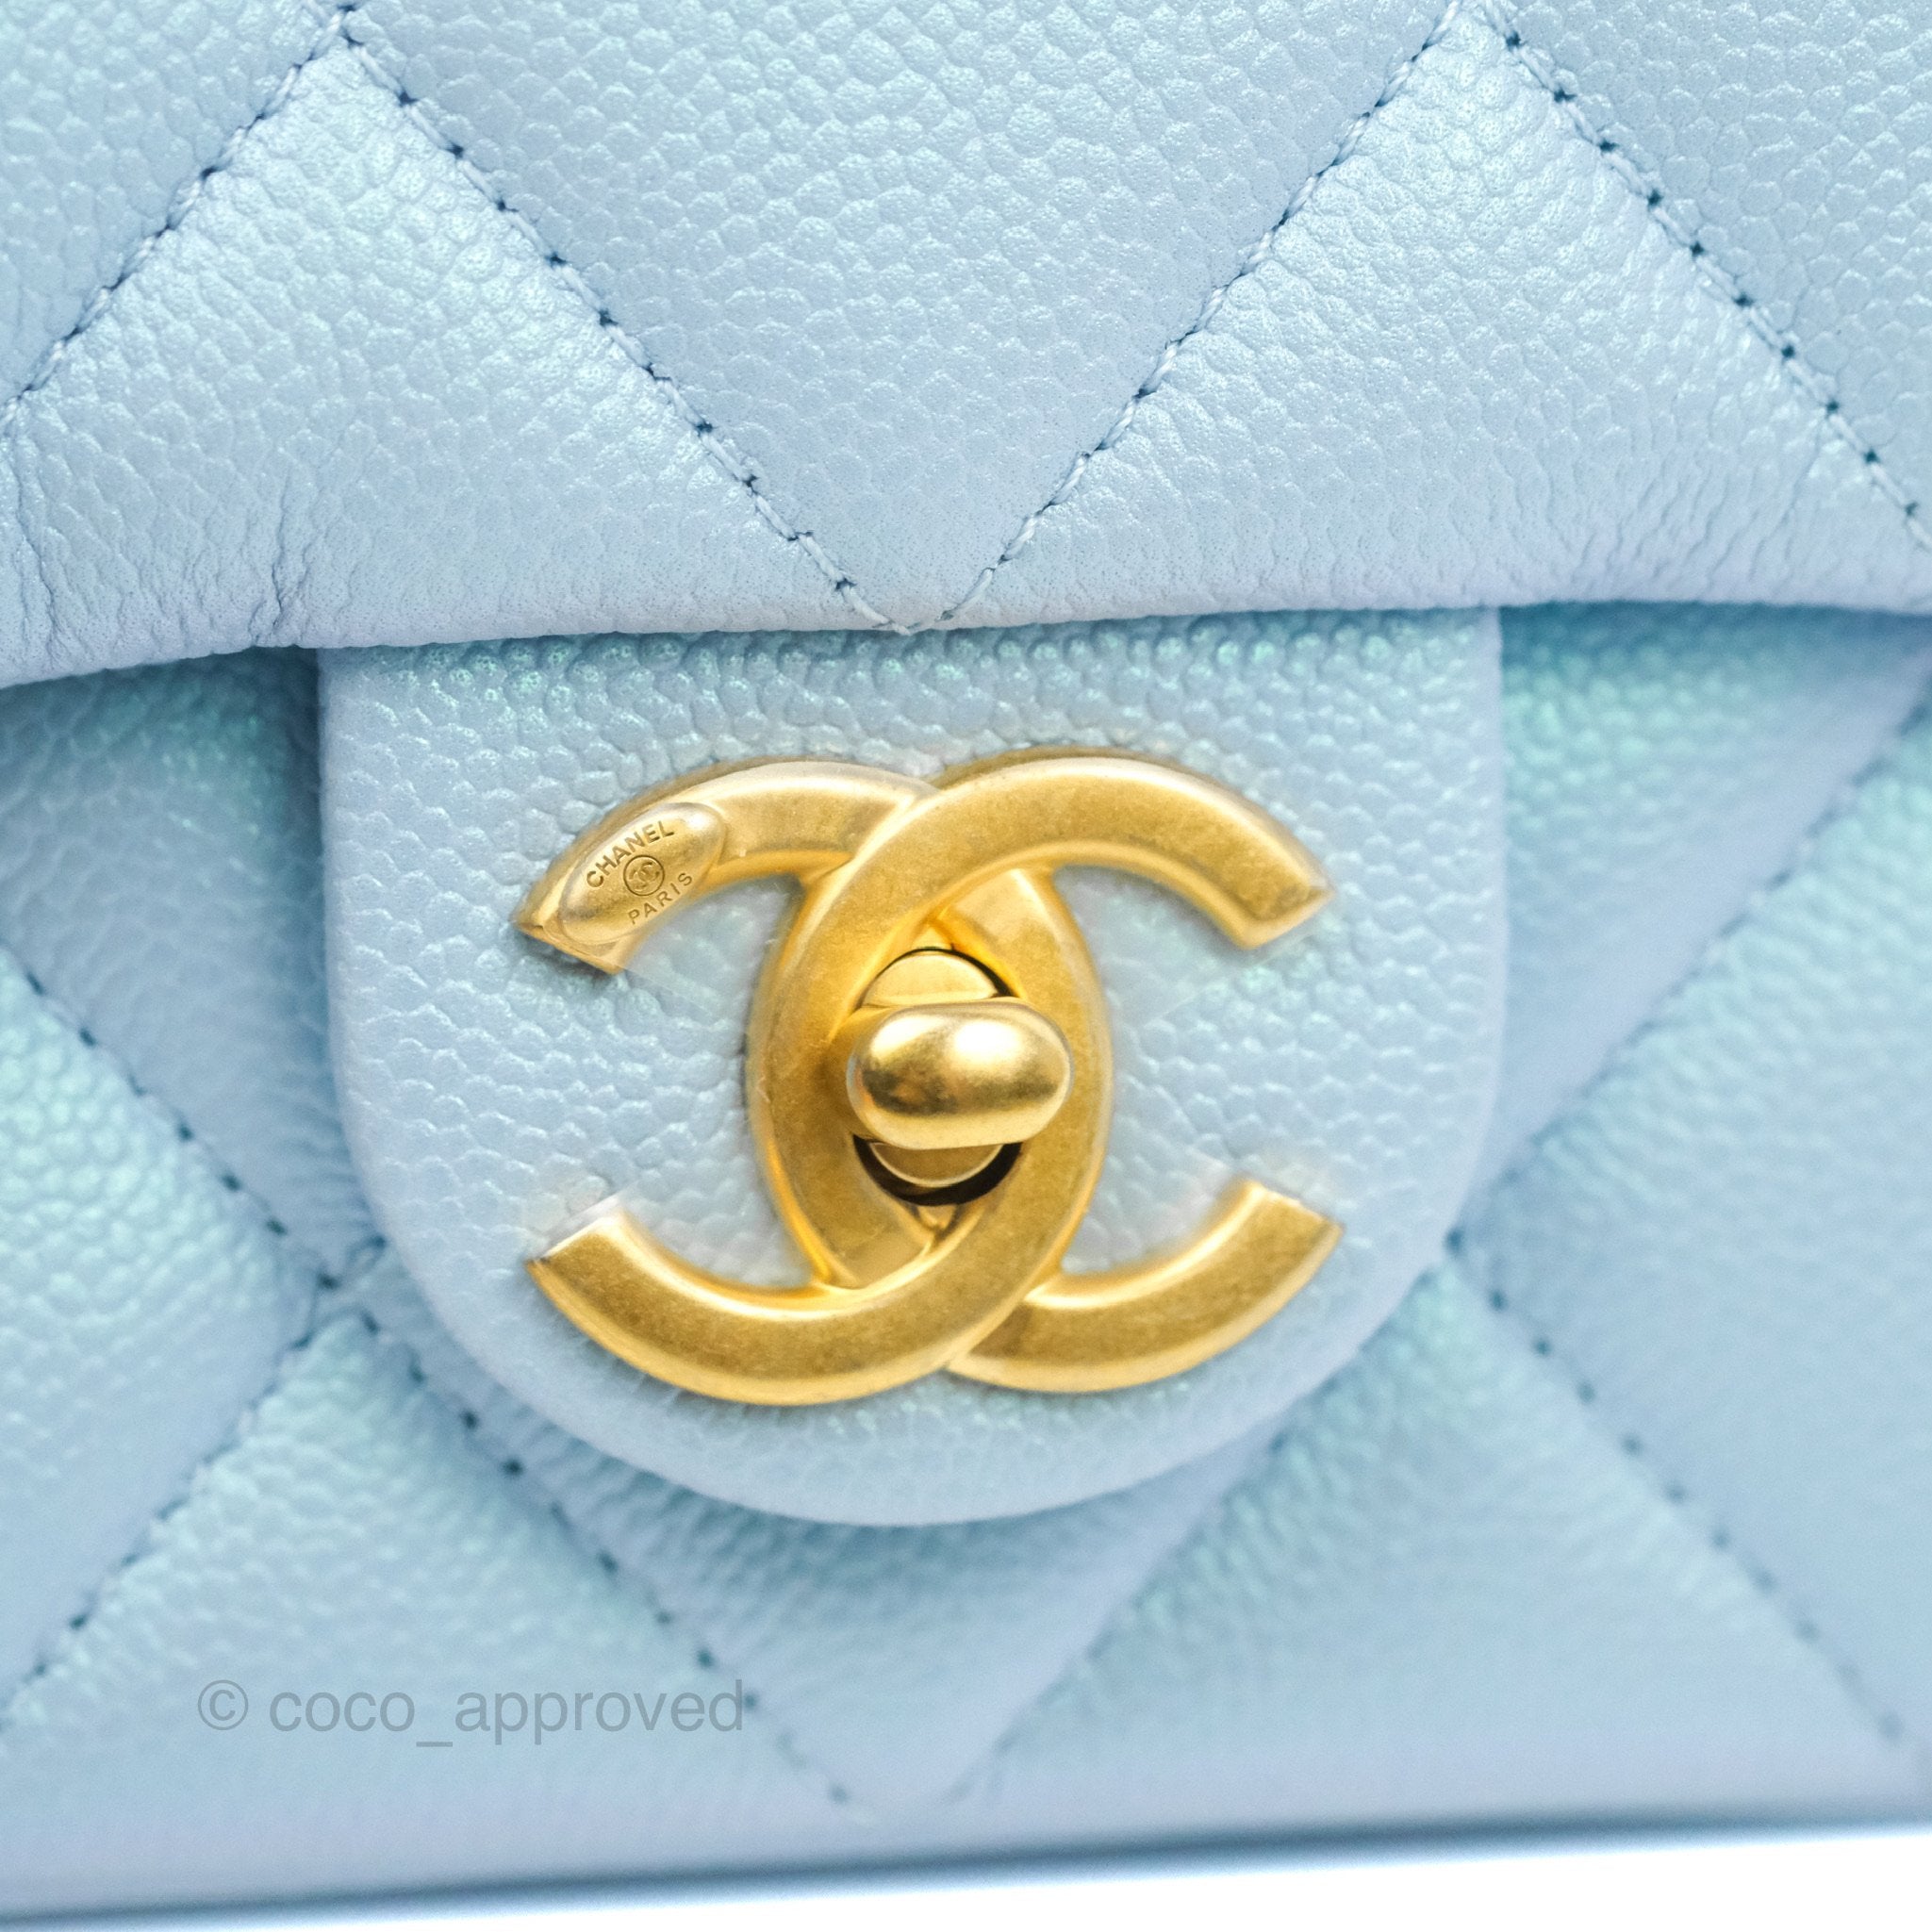 Chanel, 21K Blue Iridescent Small Coco Top Handle